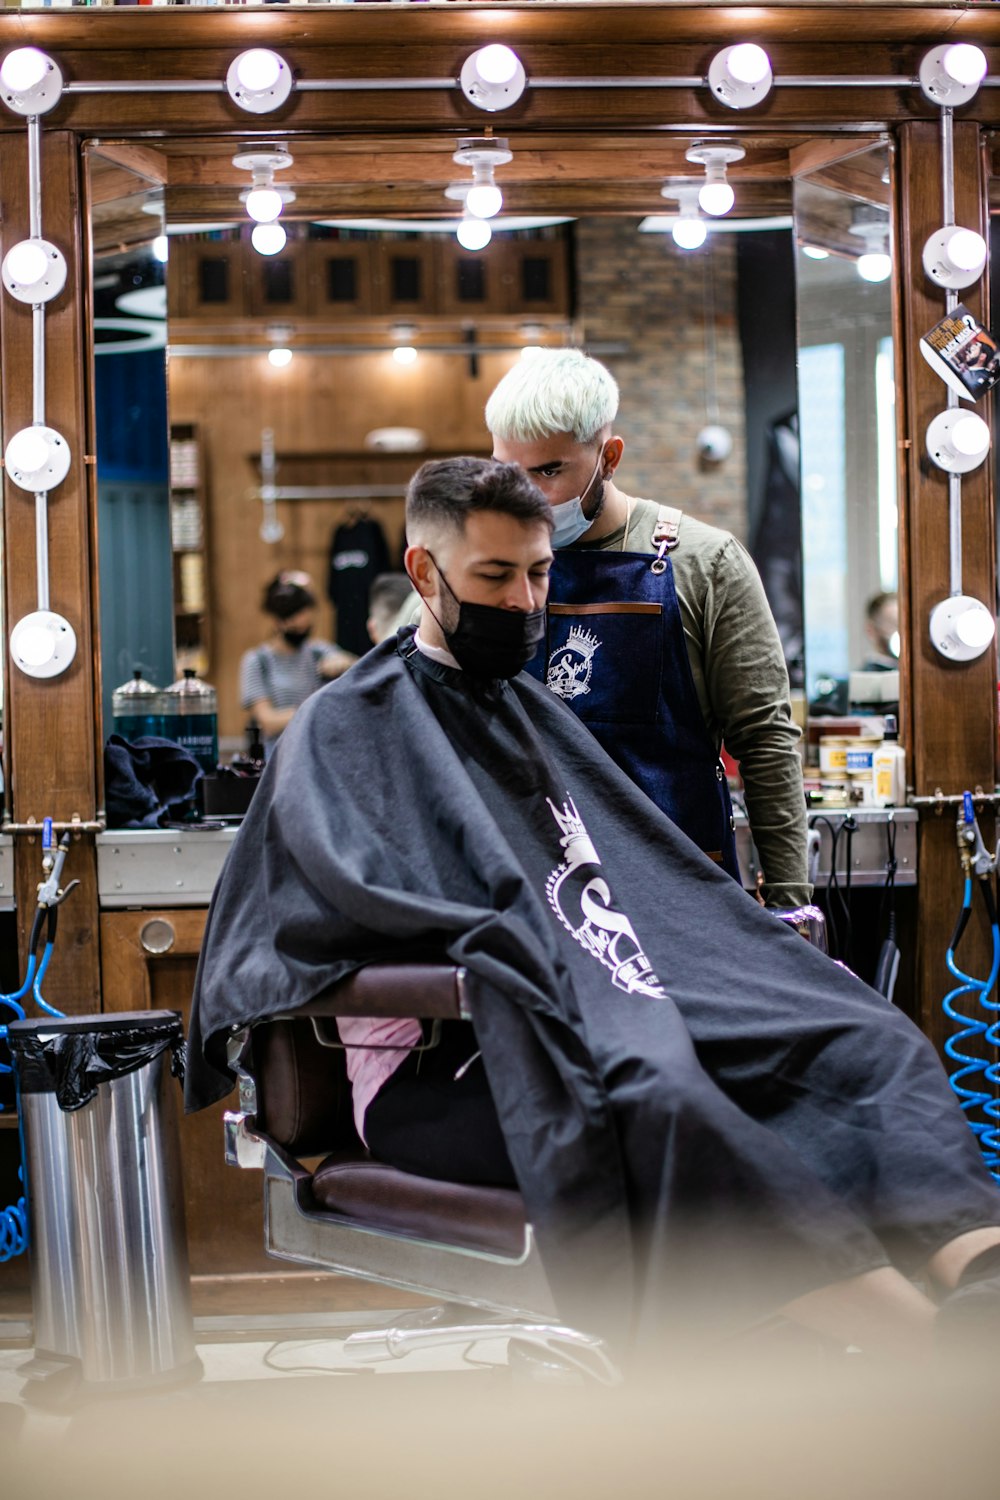 man in black and gray jacket sitting on barber chair